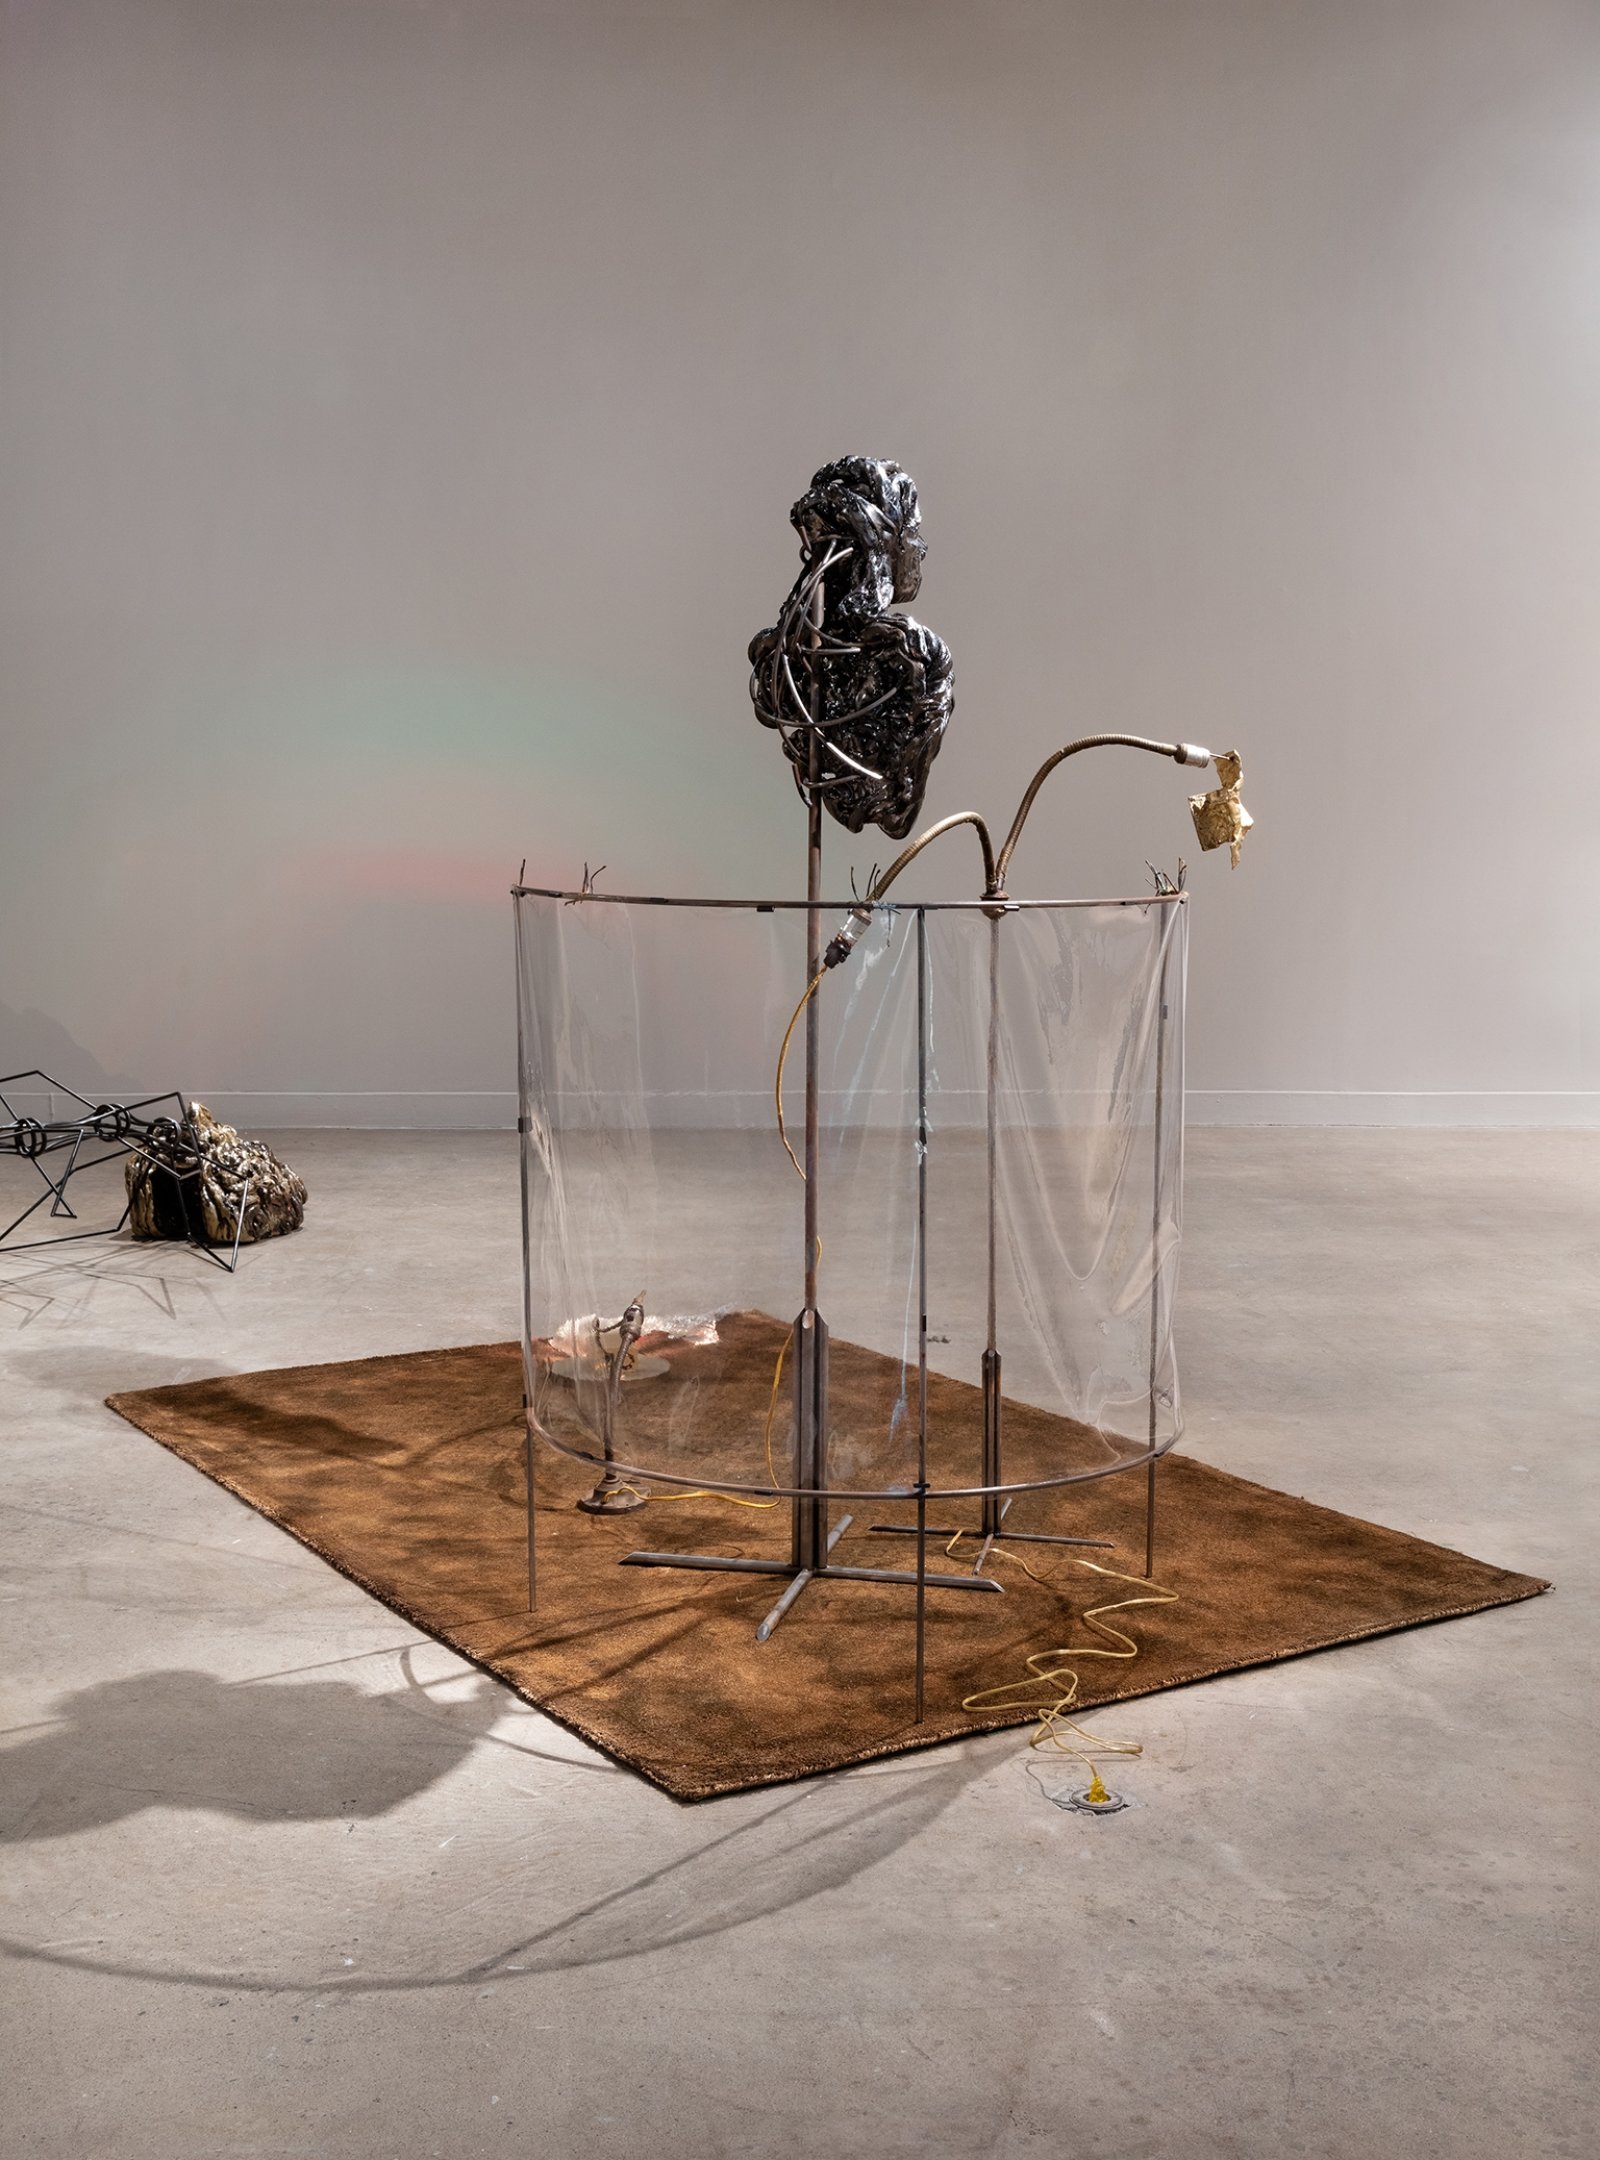 Rochelle Goldberg, Intralocutor: “Are you on or off?”, 2017, brass, gold-filled wire, resin, led transformer, fibre optics, glazed ceramic, steel, carpet, dispersion paint, vinyl, cast iron, brass lamp, 69 x 96 x 60 in. (175 x 244 x 152 cm). Installation view, Waves and Waves, Oakville Galleries, Oakville, 2019